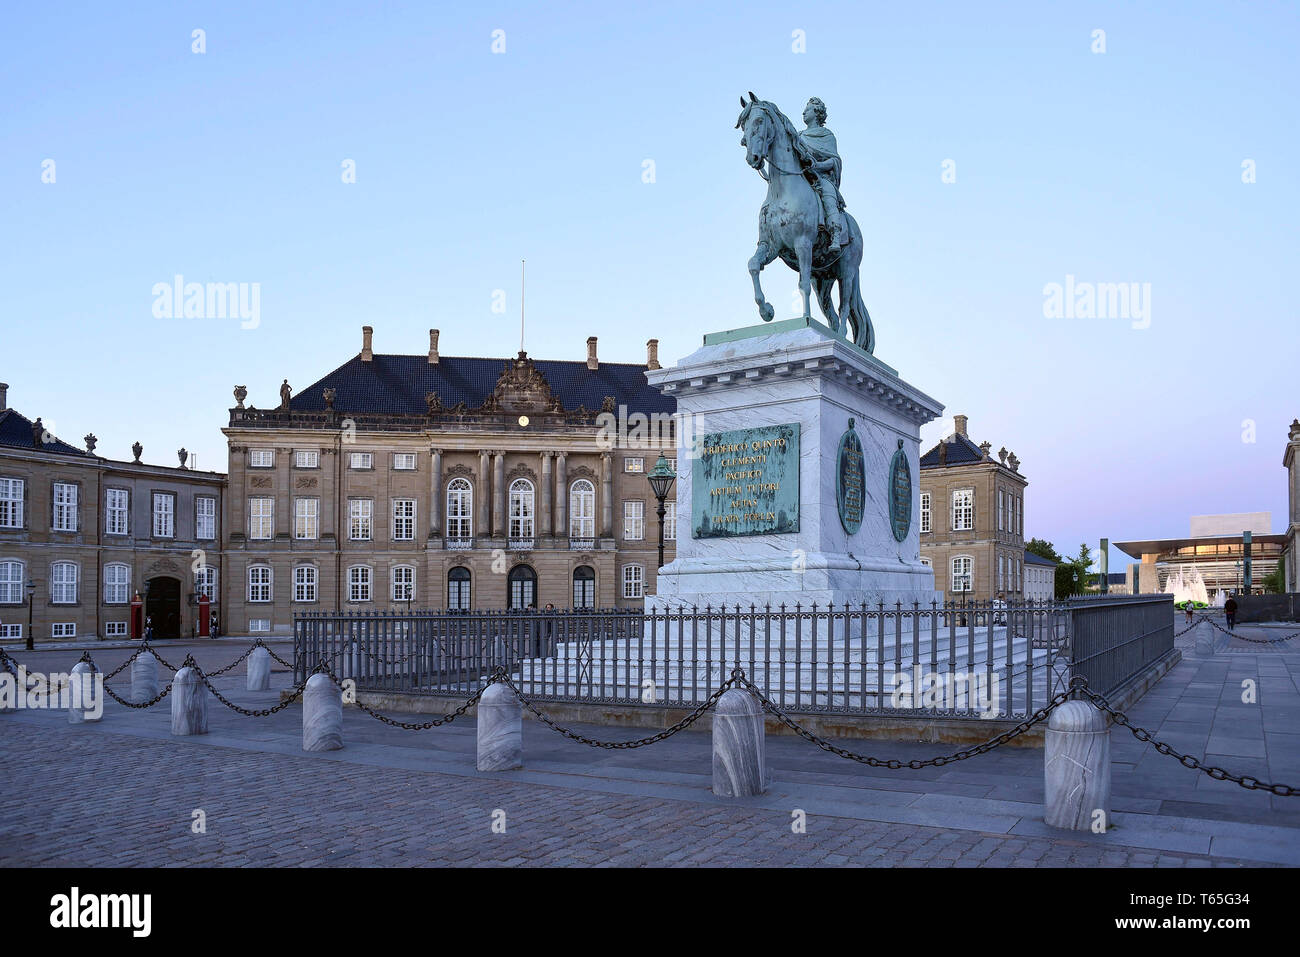 Denmark, Copenhagen, Amalienborg Palace courtyard . Amalienborg is the home of the Danish royal family. It consists of four identical classical palace Stock Photo